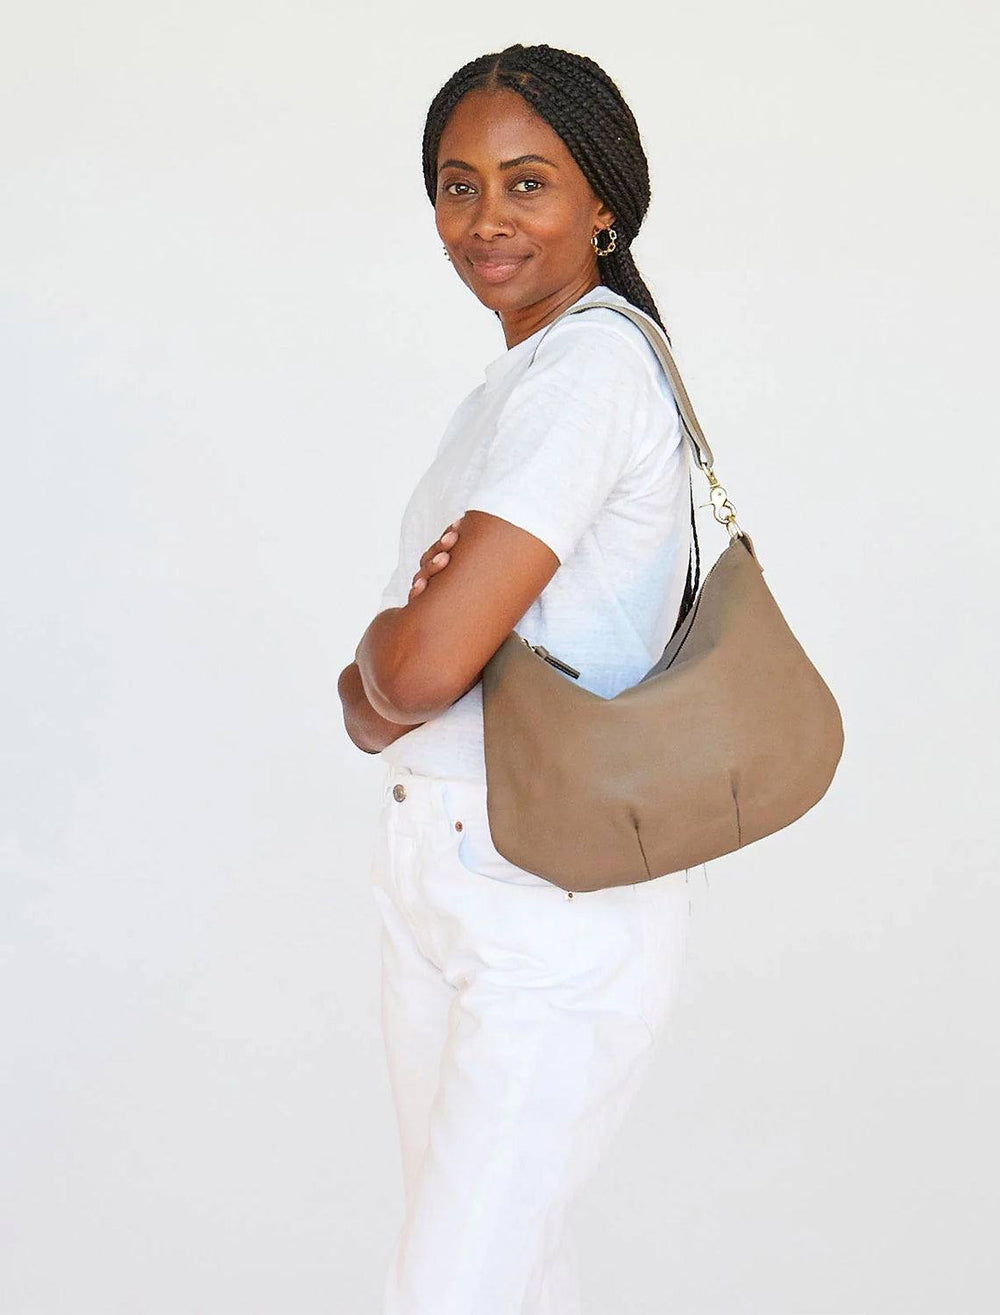 Teneriffe Suede Tote Bag - Frappe – Gift It Gray